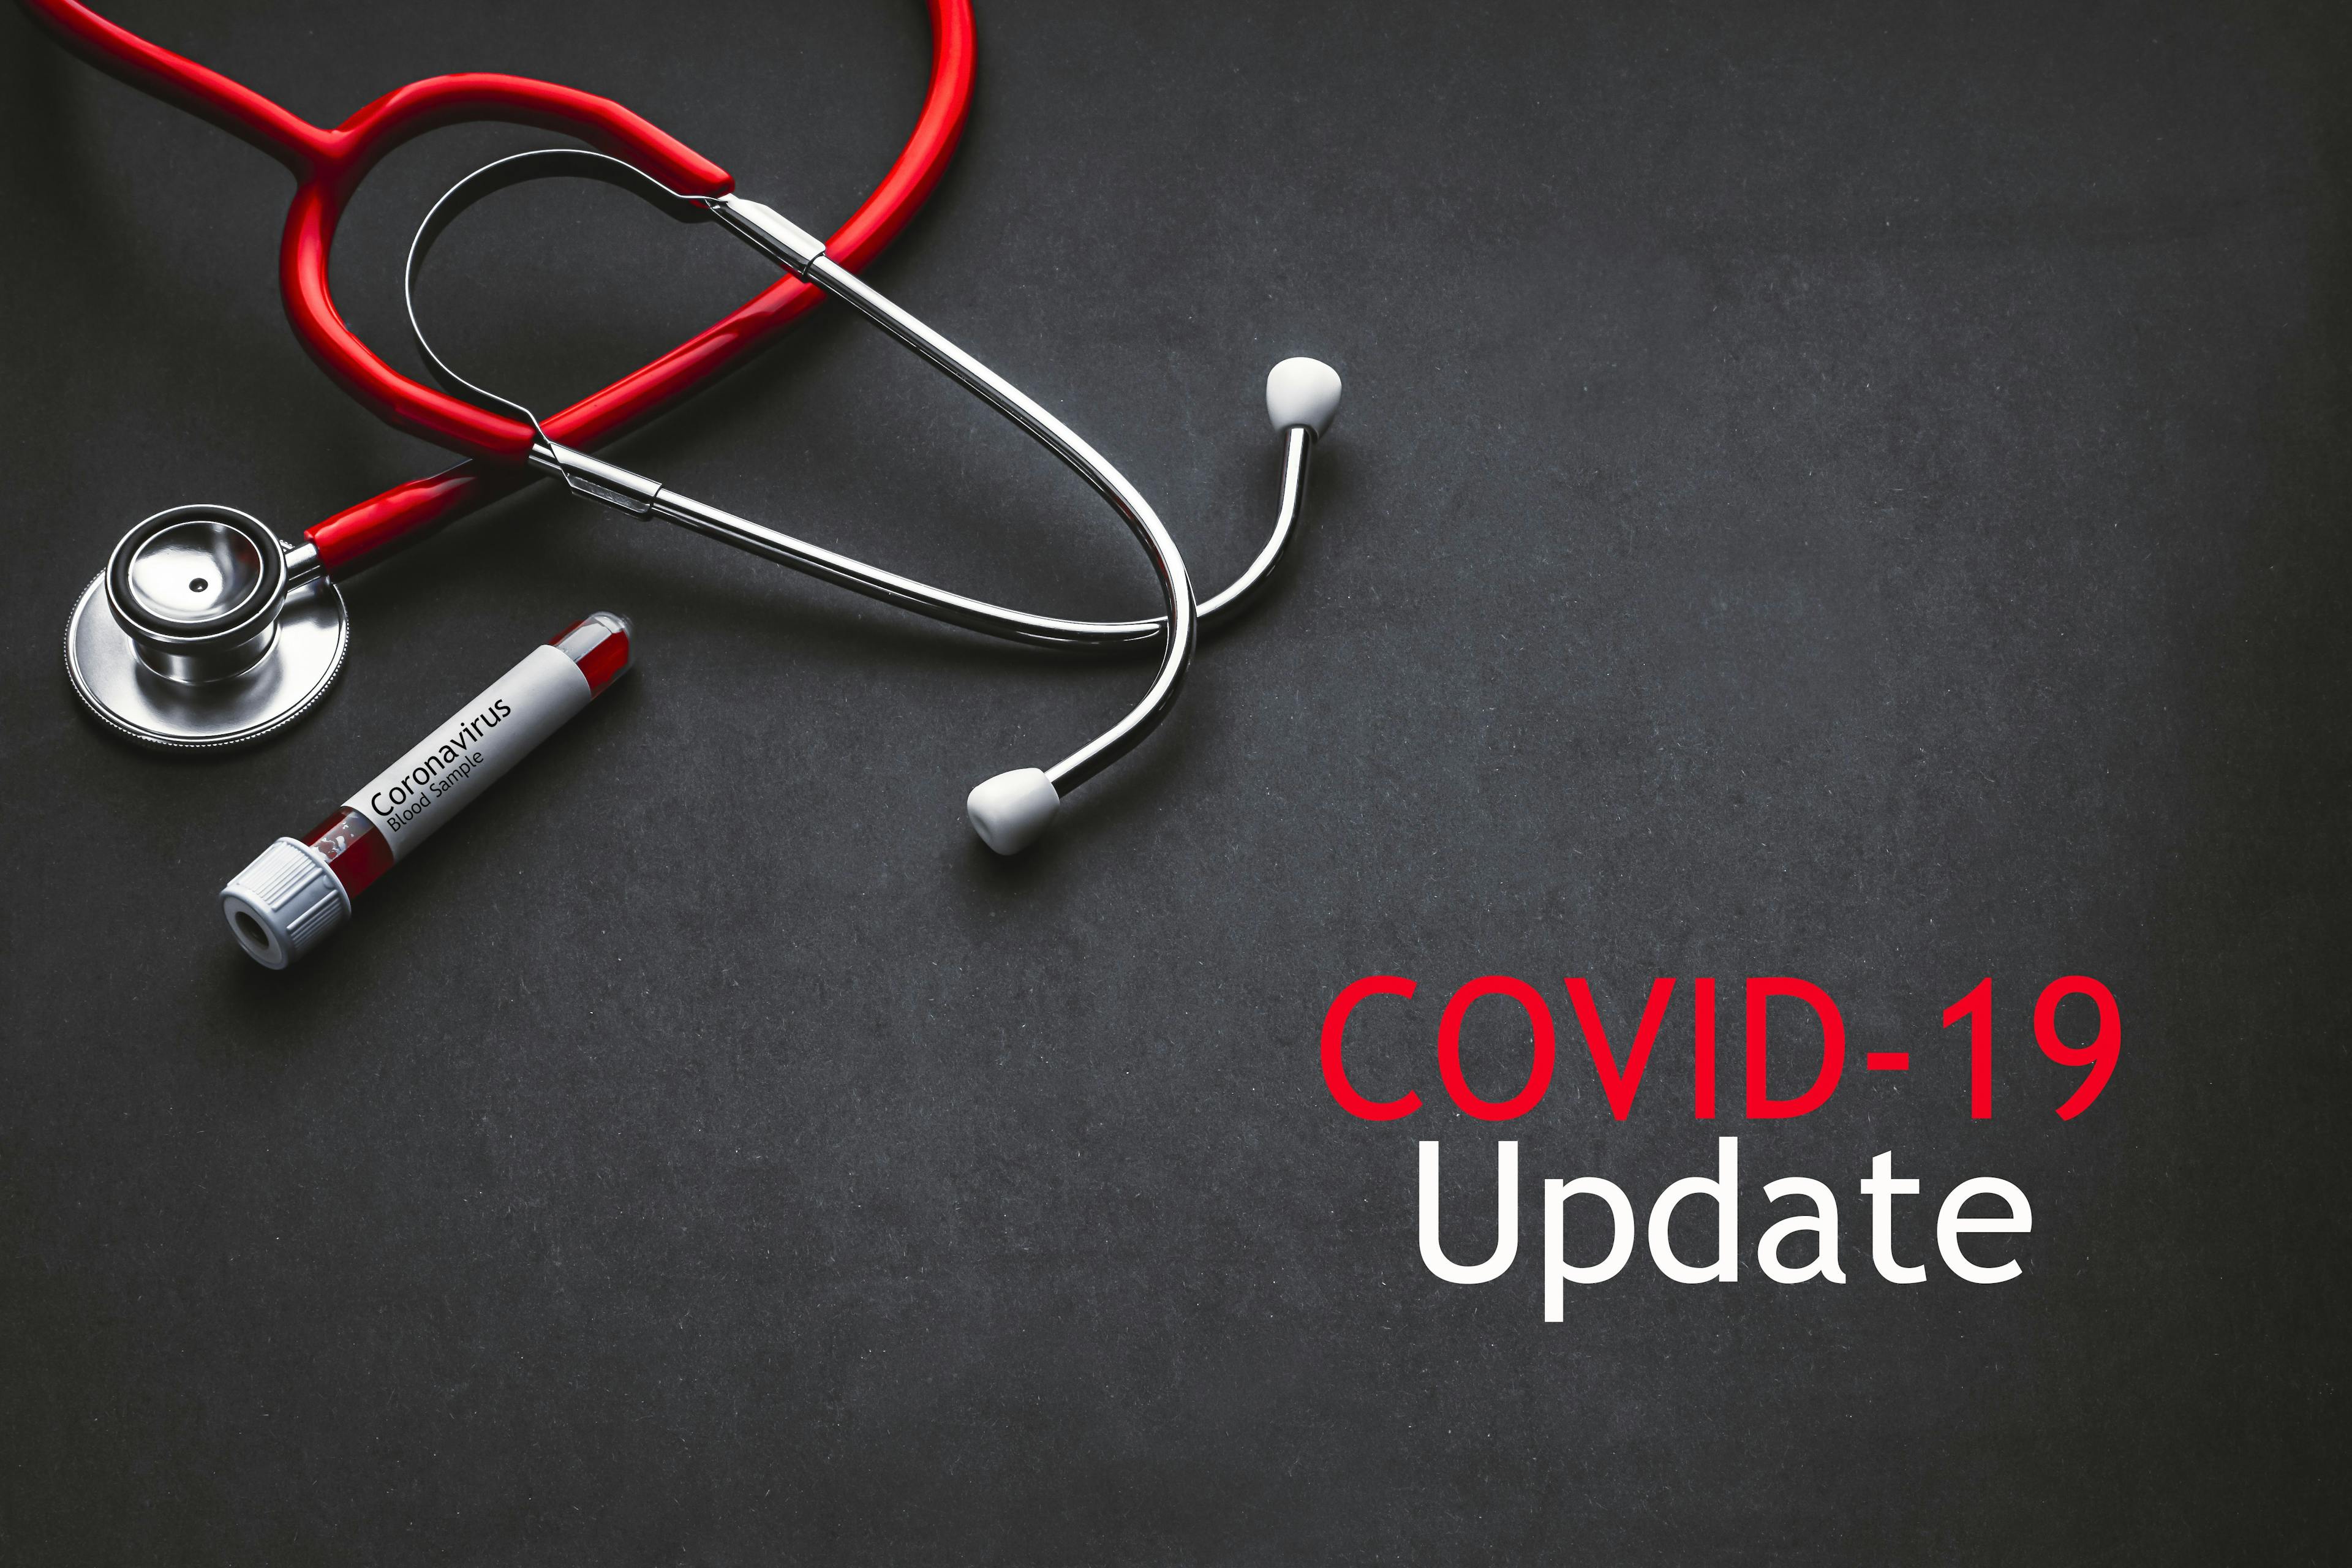 COVID-19 Update: US and Global Cases, Deaths, and Recoveries as of November 17, 2020